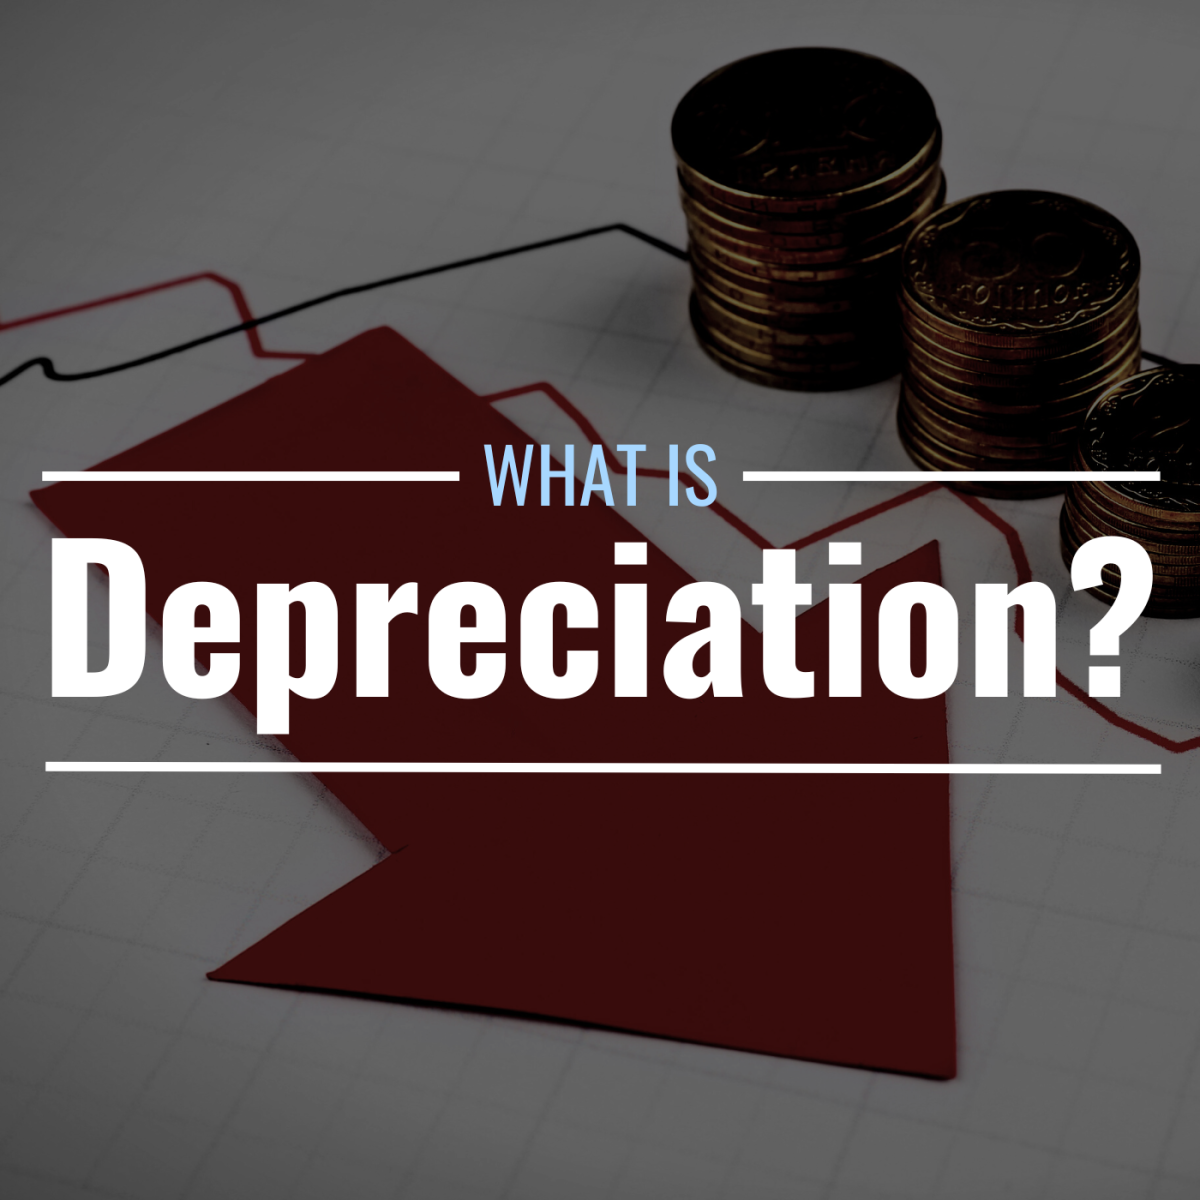 Photo of an arrow pointing downward against a stack of coins with text overlay that reads "What Is Depreciation?"